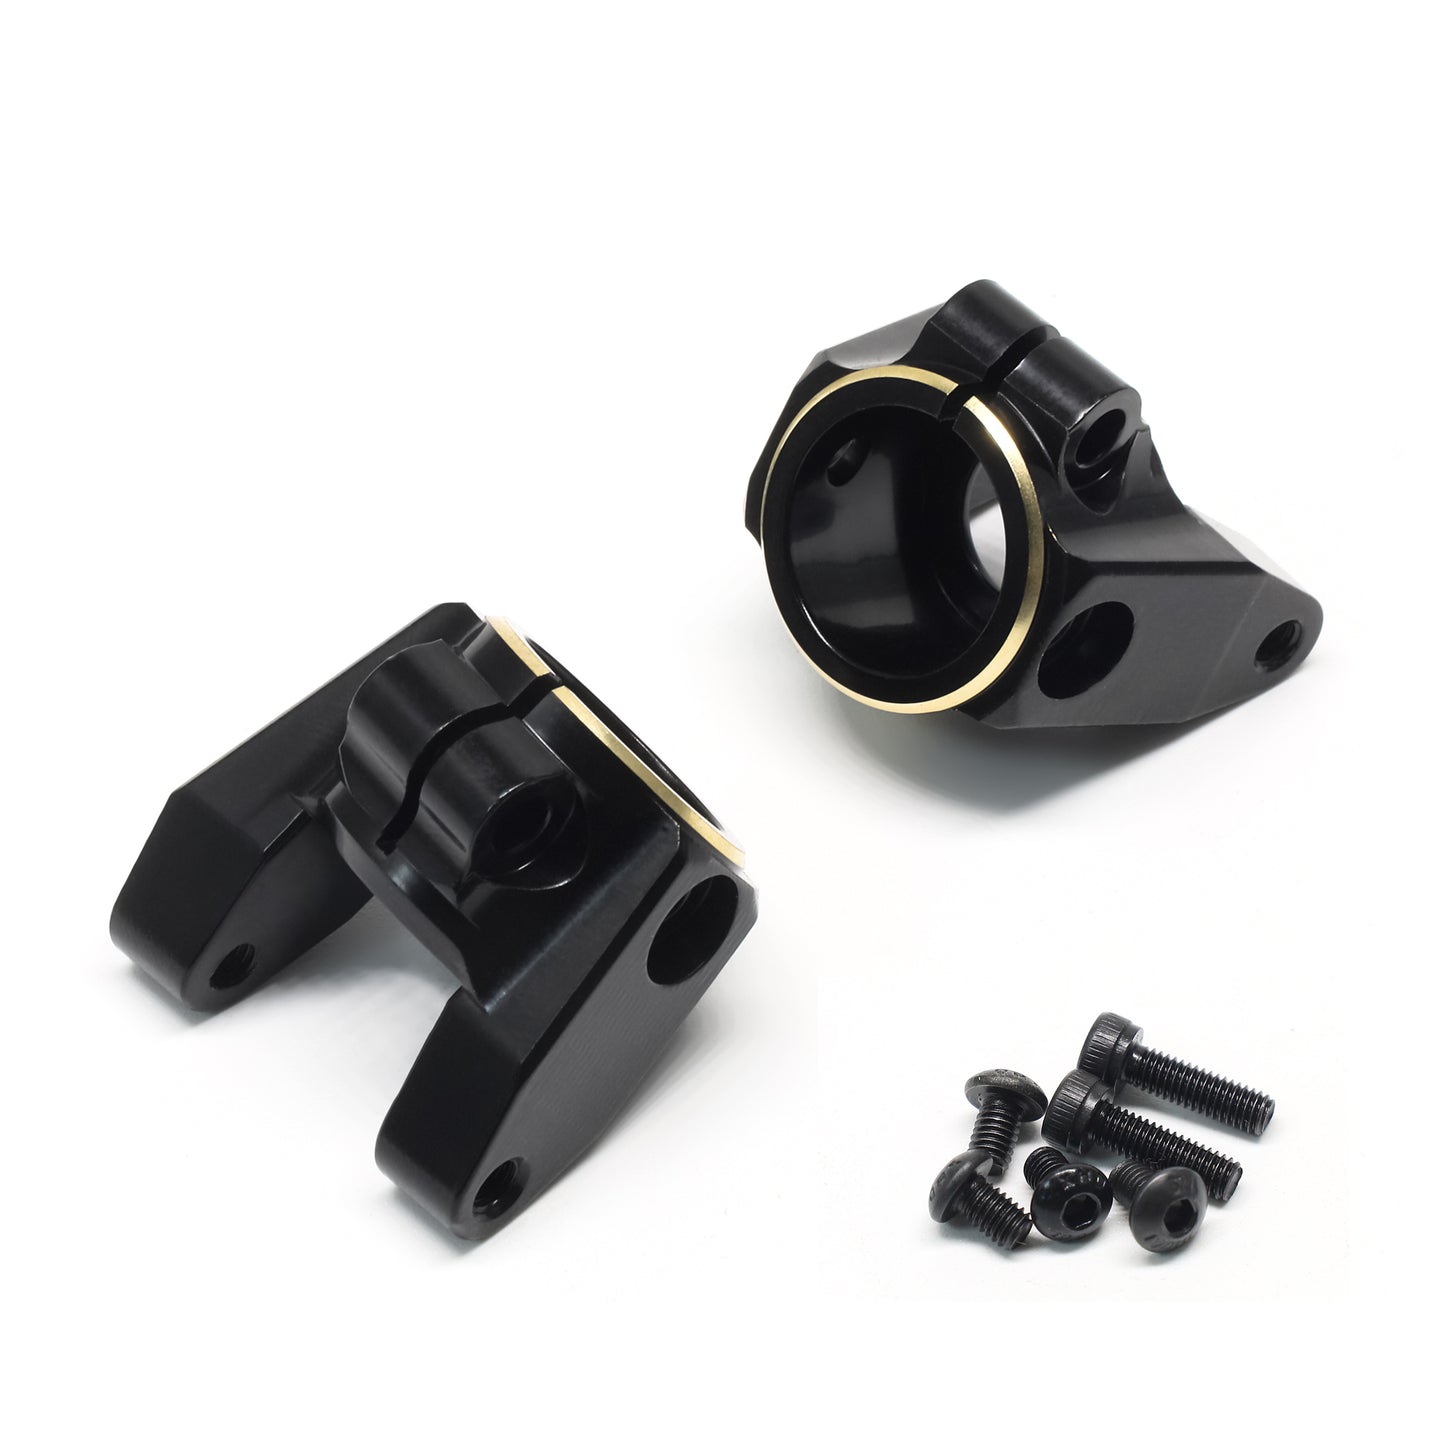 TREAL SCX10 Pro Brass C-Hub Carriers L/R Heavy Weight Upgrades Compatible with Axial 1/10th SCX10 PRO Comp Kit